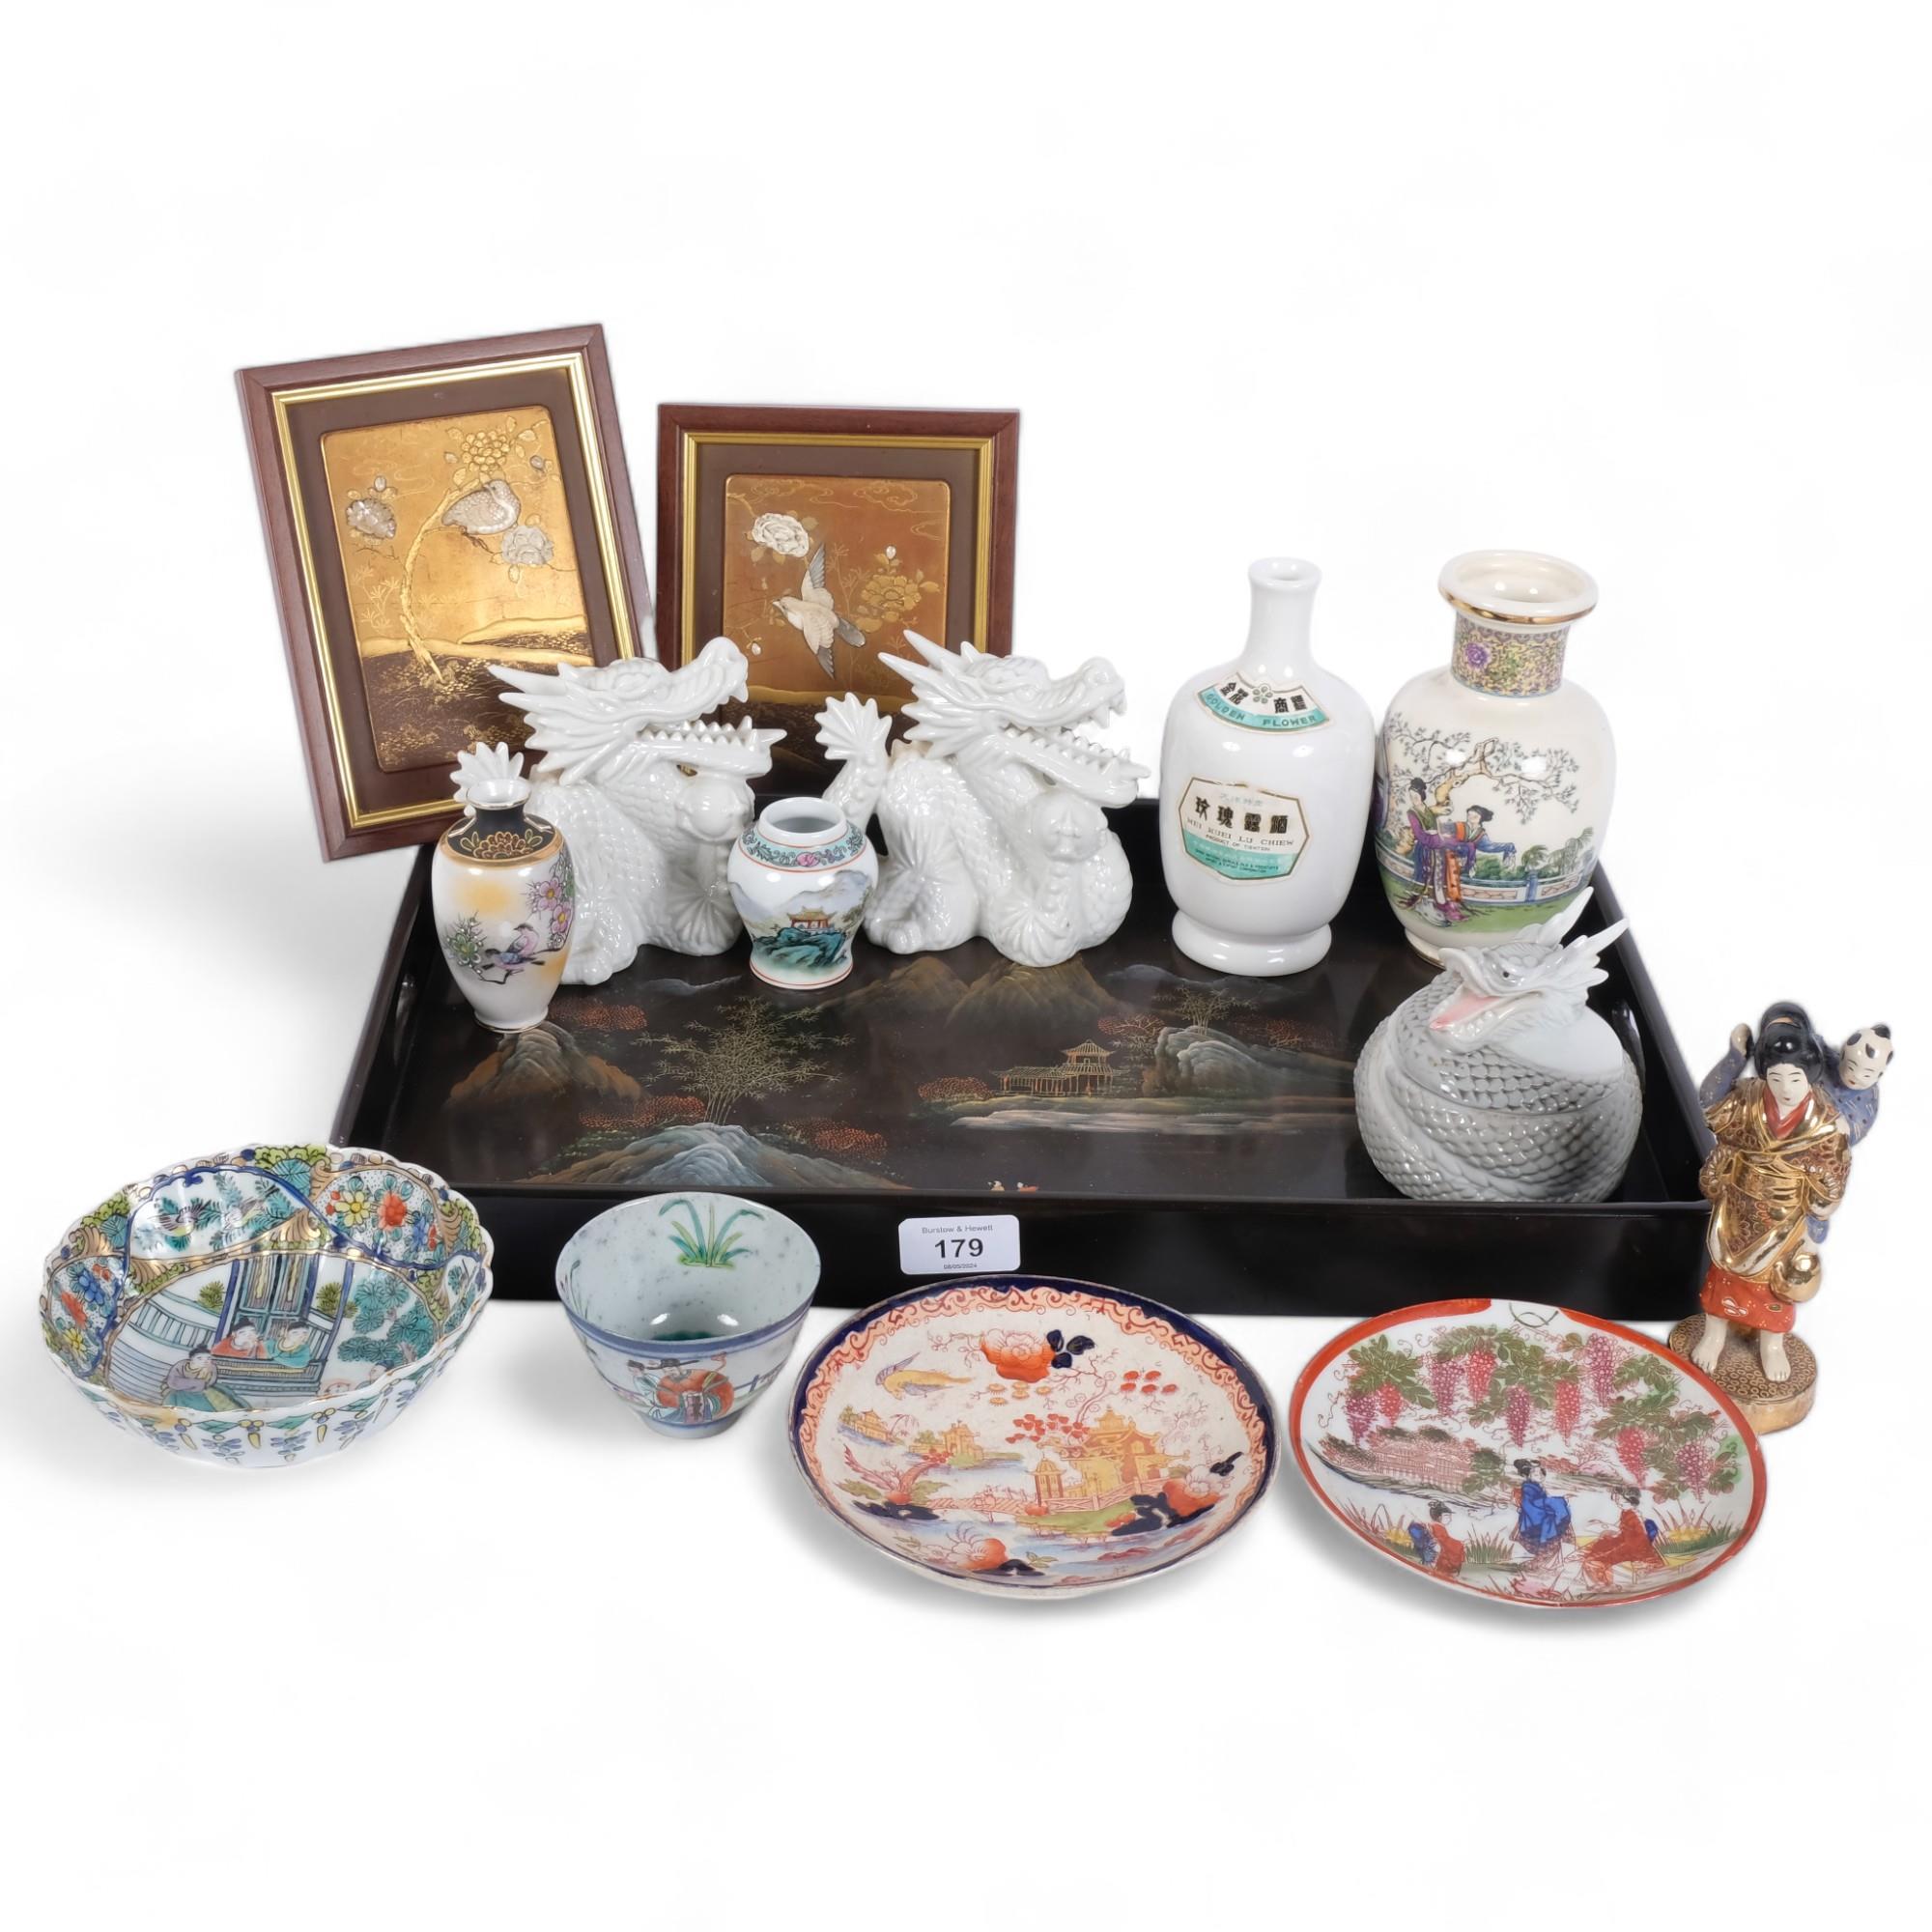 A group of Oriental items, including a rectangular lacquered 2-handled tray, Oriental vases, 2